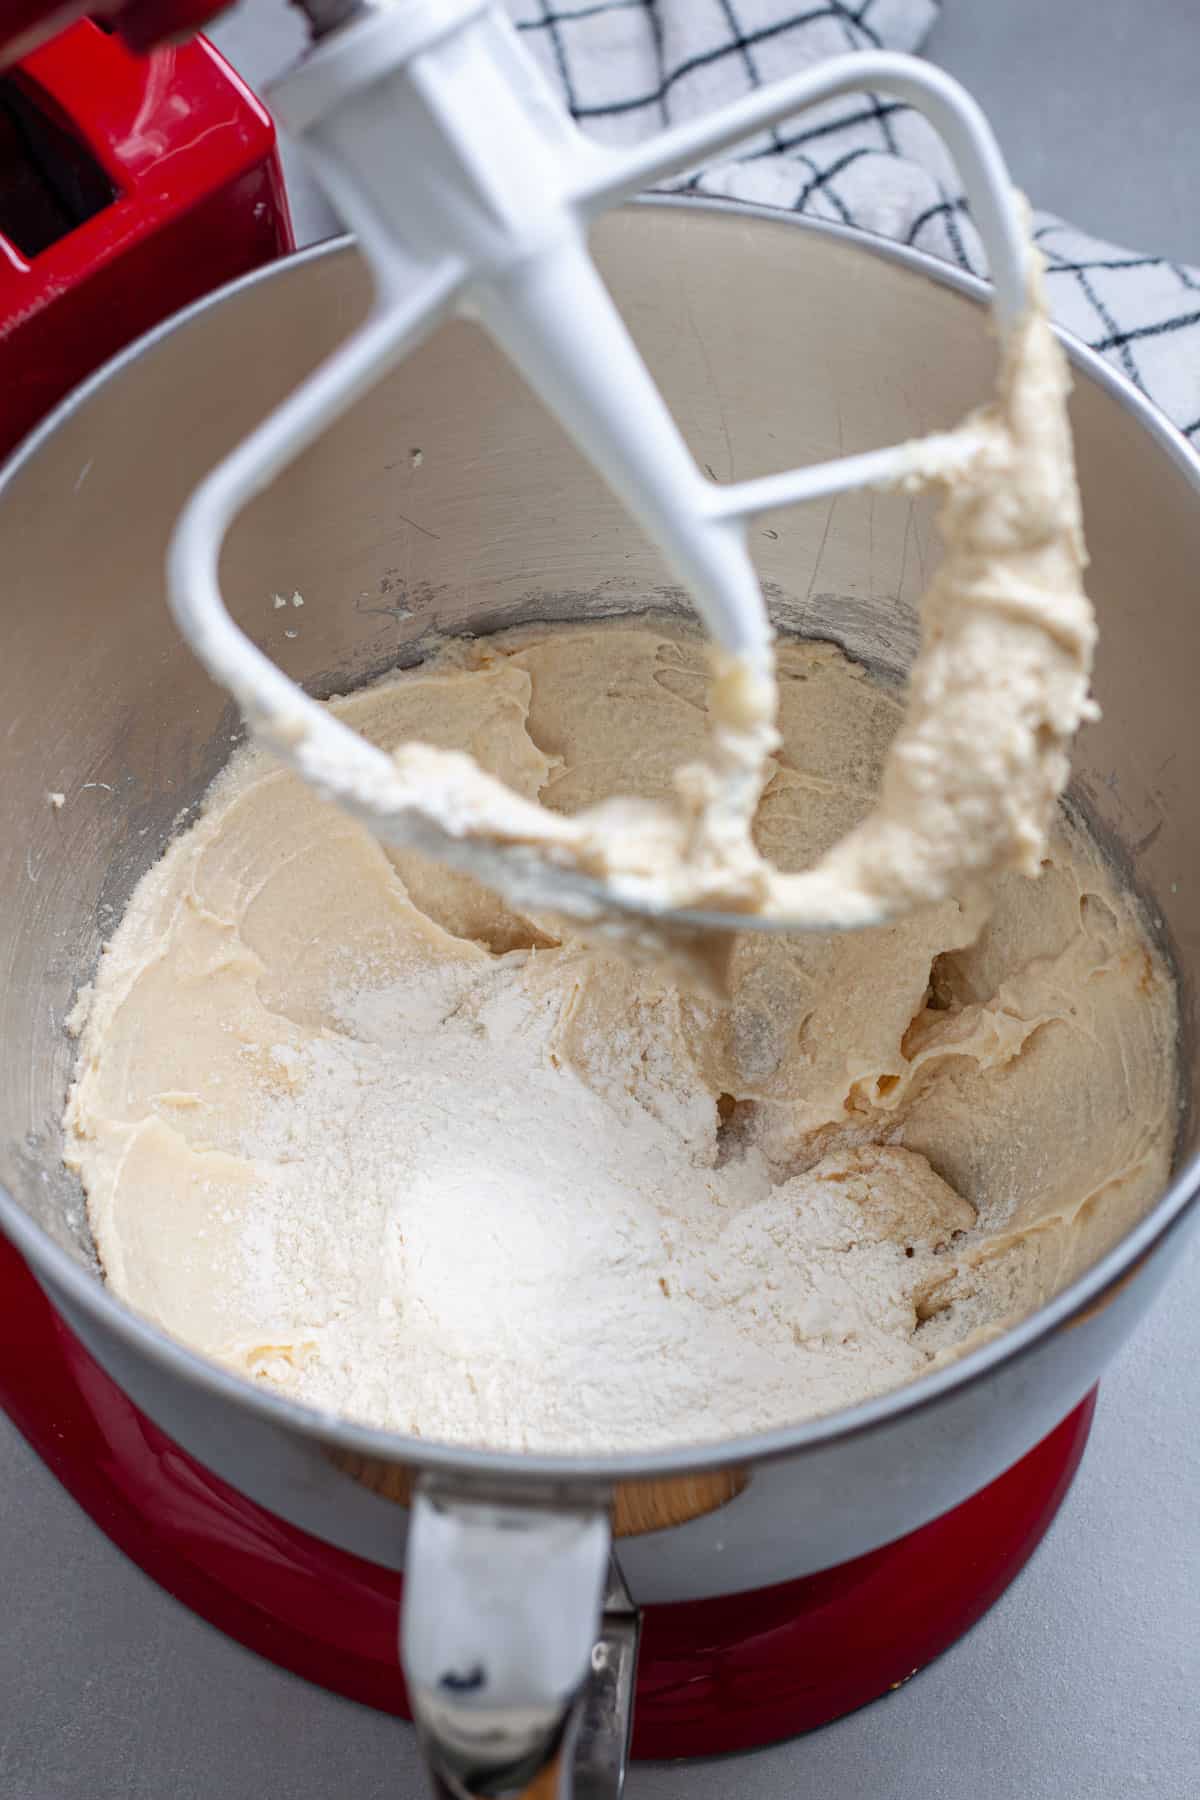 Dry ingredients added to a stand mixer bowl with sugar, butter and eggs.